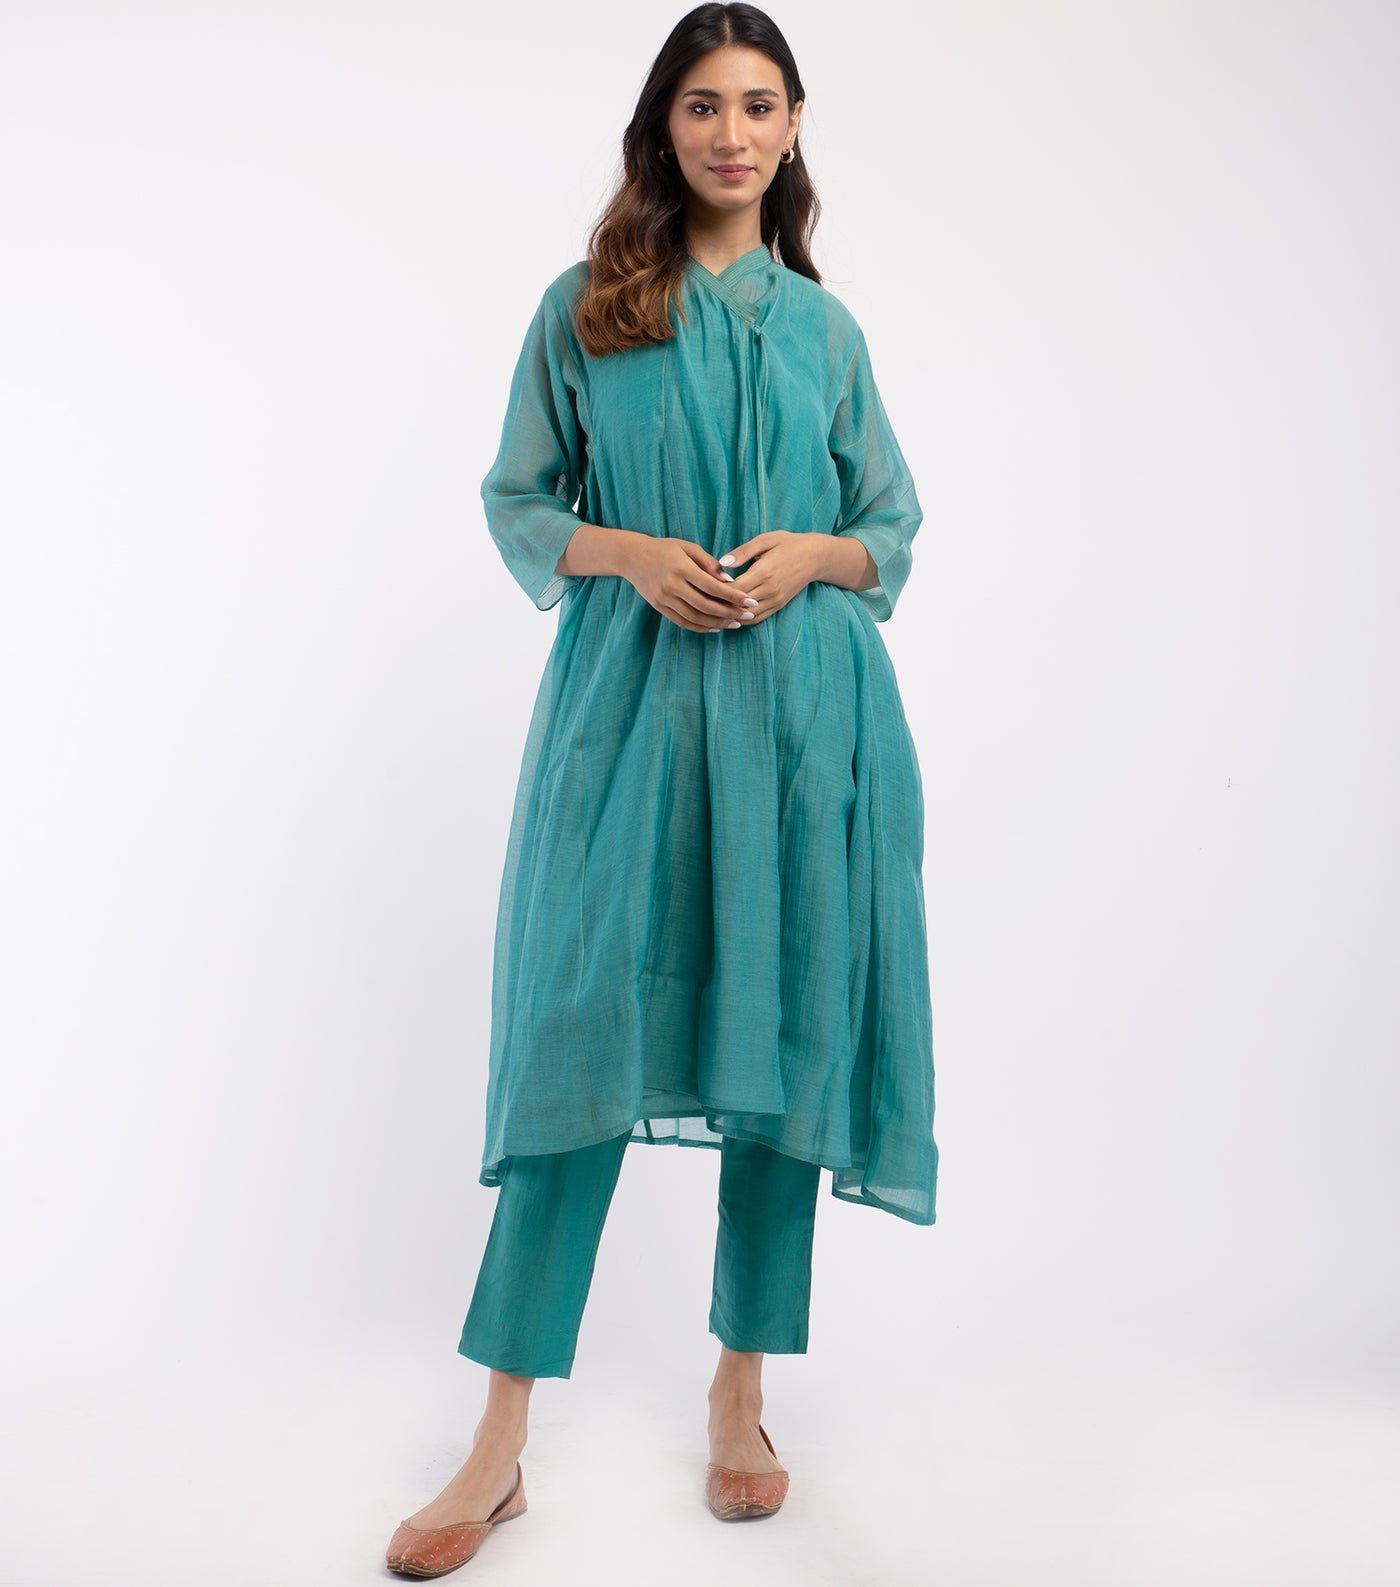 Teal Blue embroidered Chanderi choga